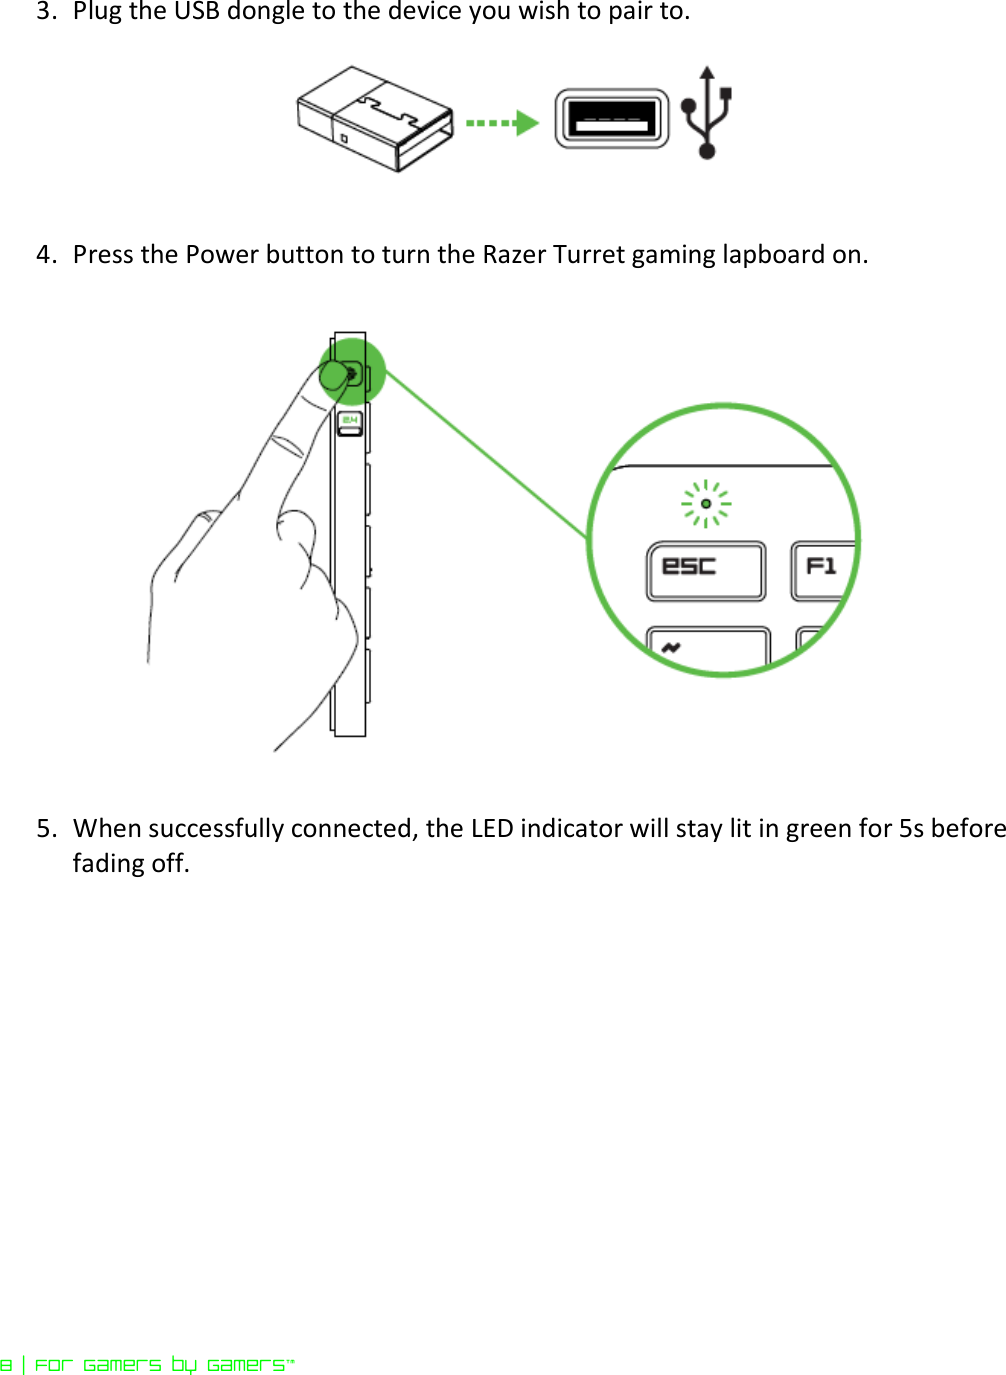 8 | For gamers by gamers™  3. Plug the USB dongle to the device you wish to pair to.   4. Press the Power button to turn the Razer Turret gaming lapboard on.     5. When successfully connected, the LED indicator will stay lit in green for 5s before fading off.   